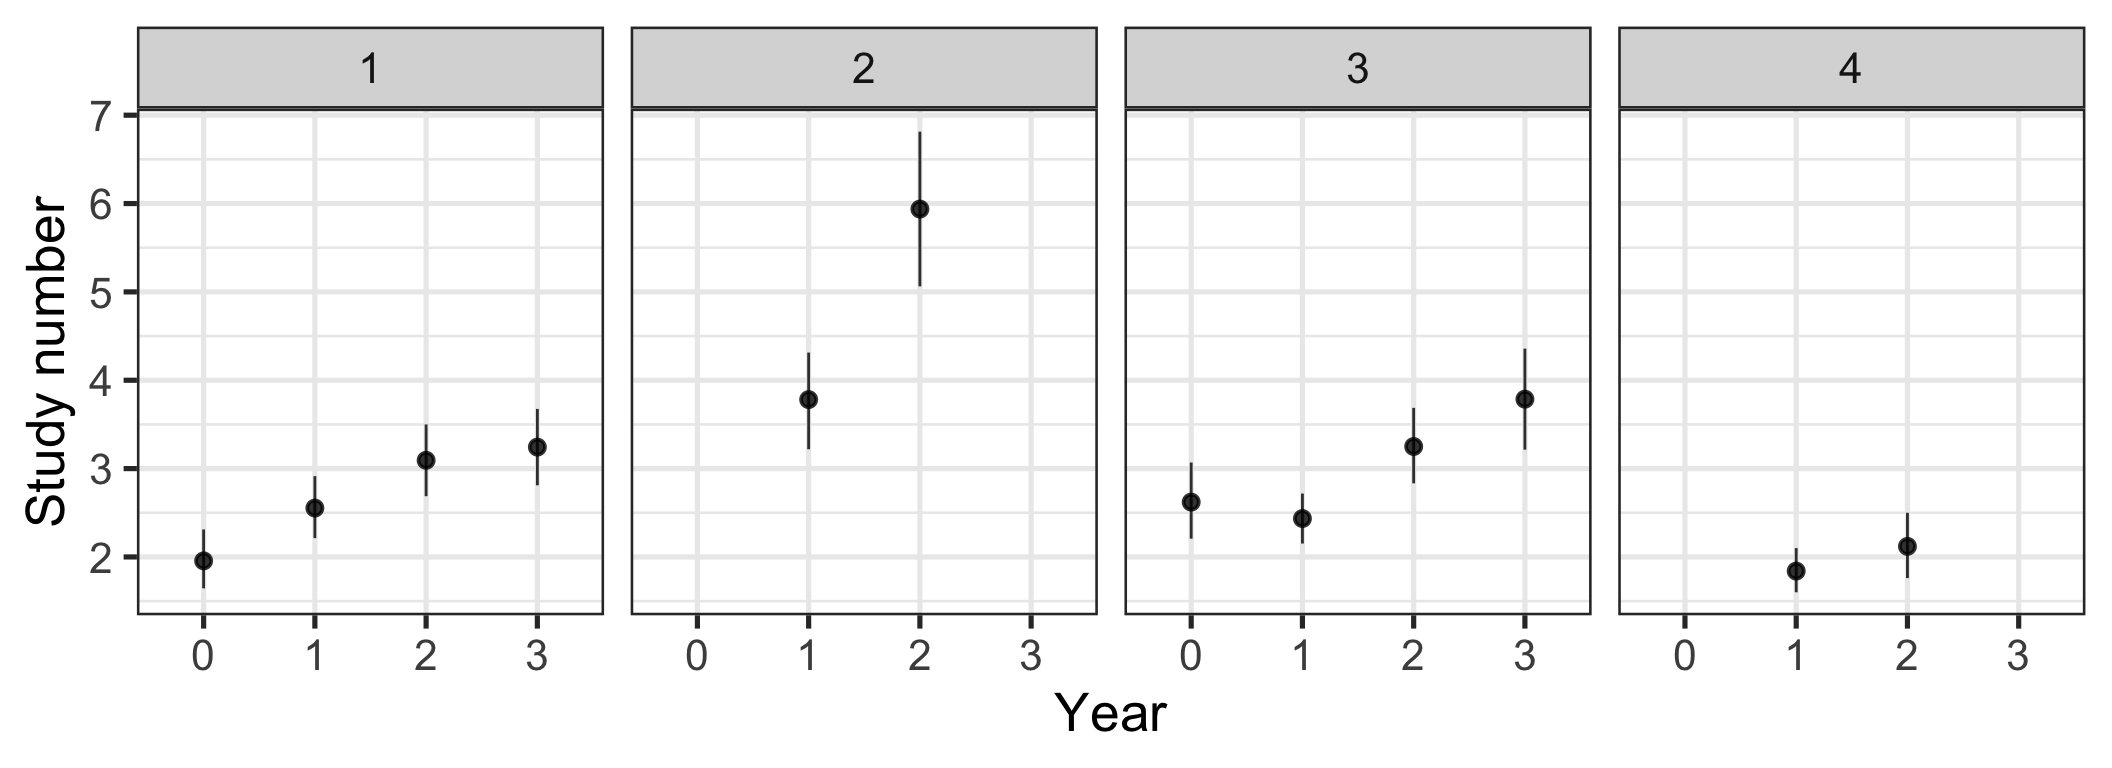 Change in number of studies per article over time by journal. Bootstrapped means and 95% CIs.